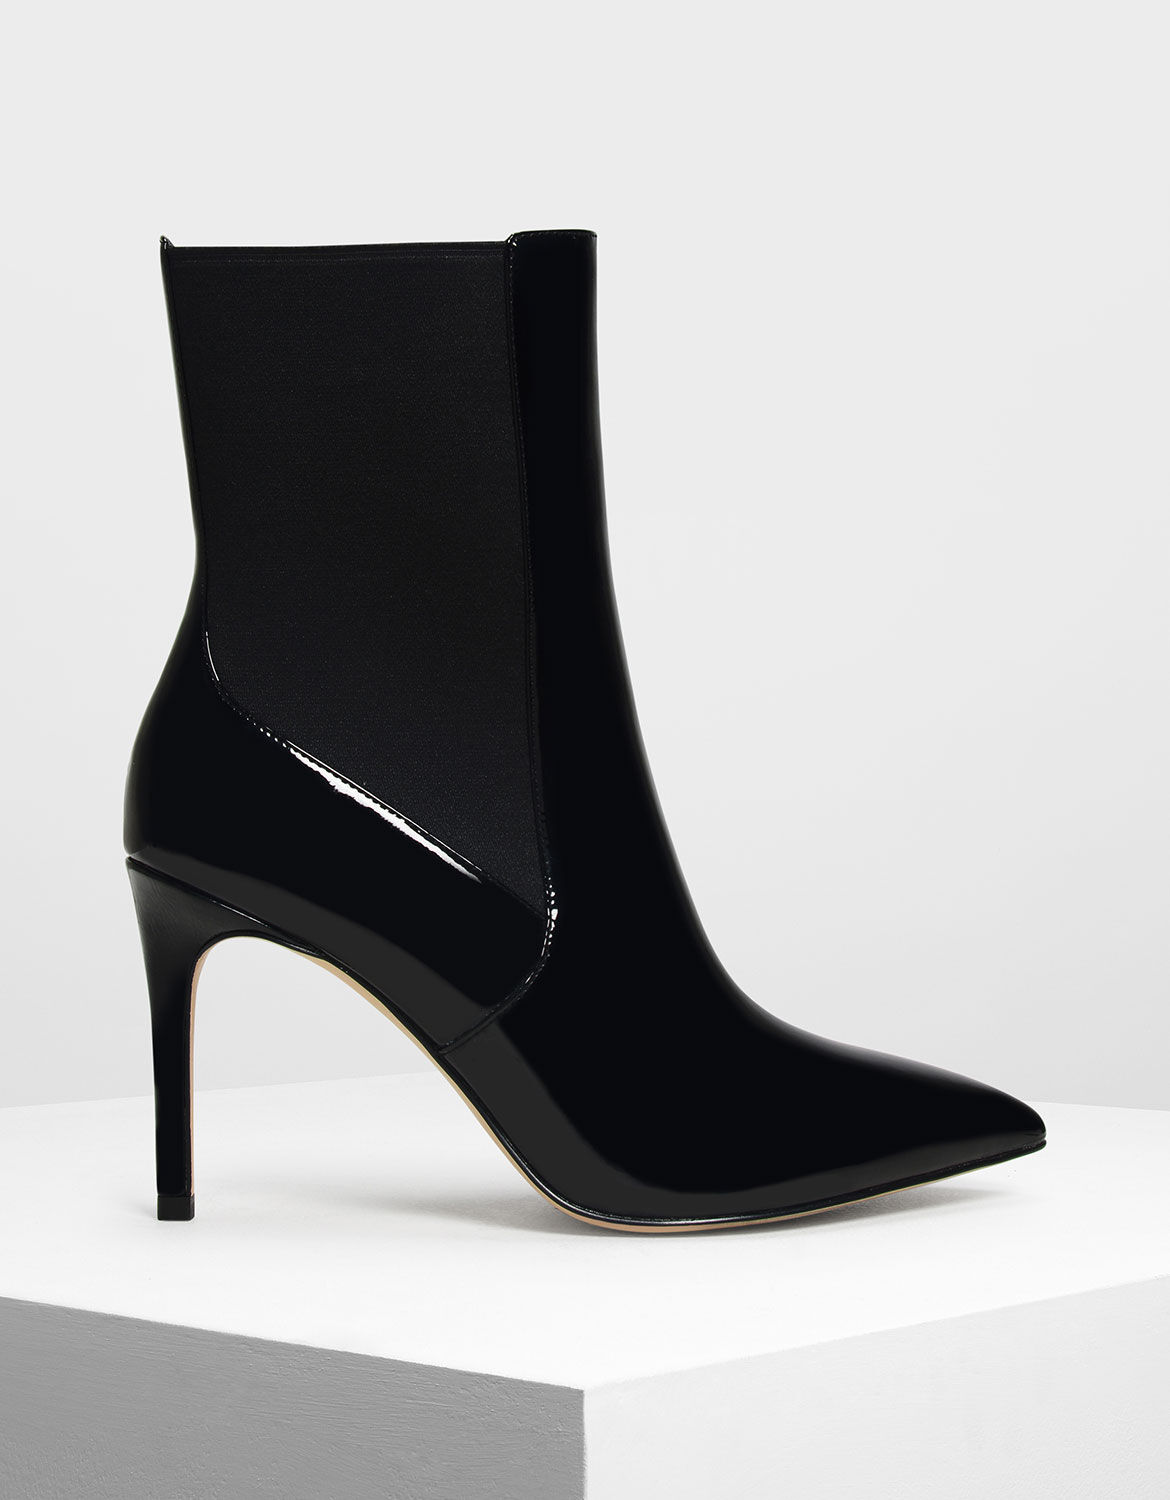 black pointed chelsea boots